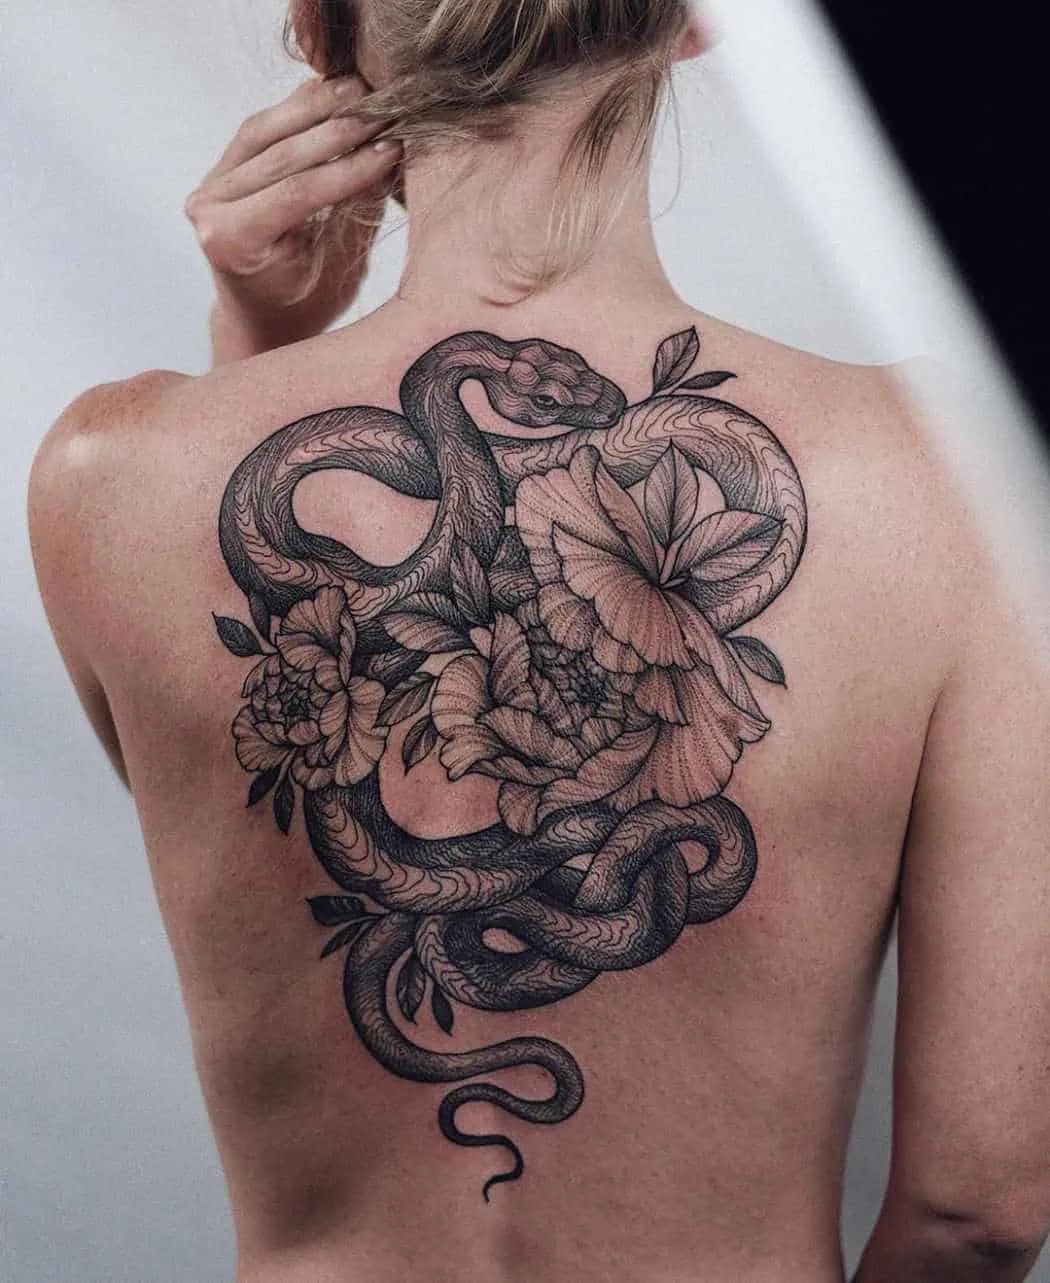 Snake floral tattoo